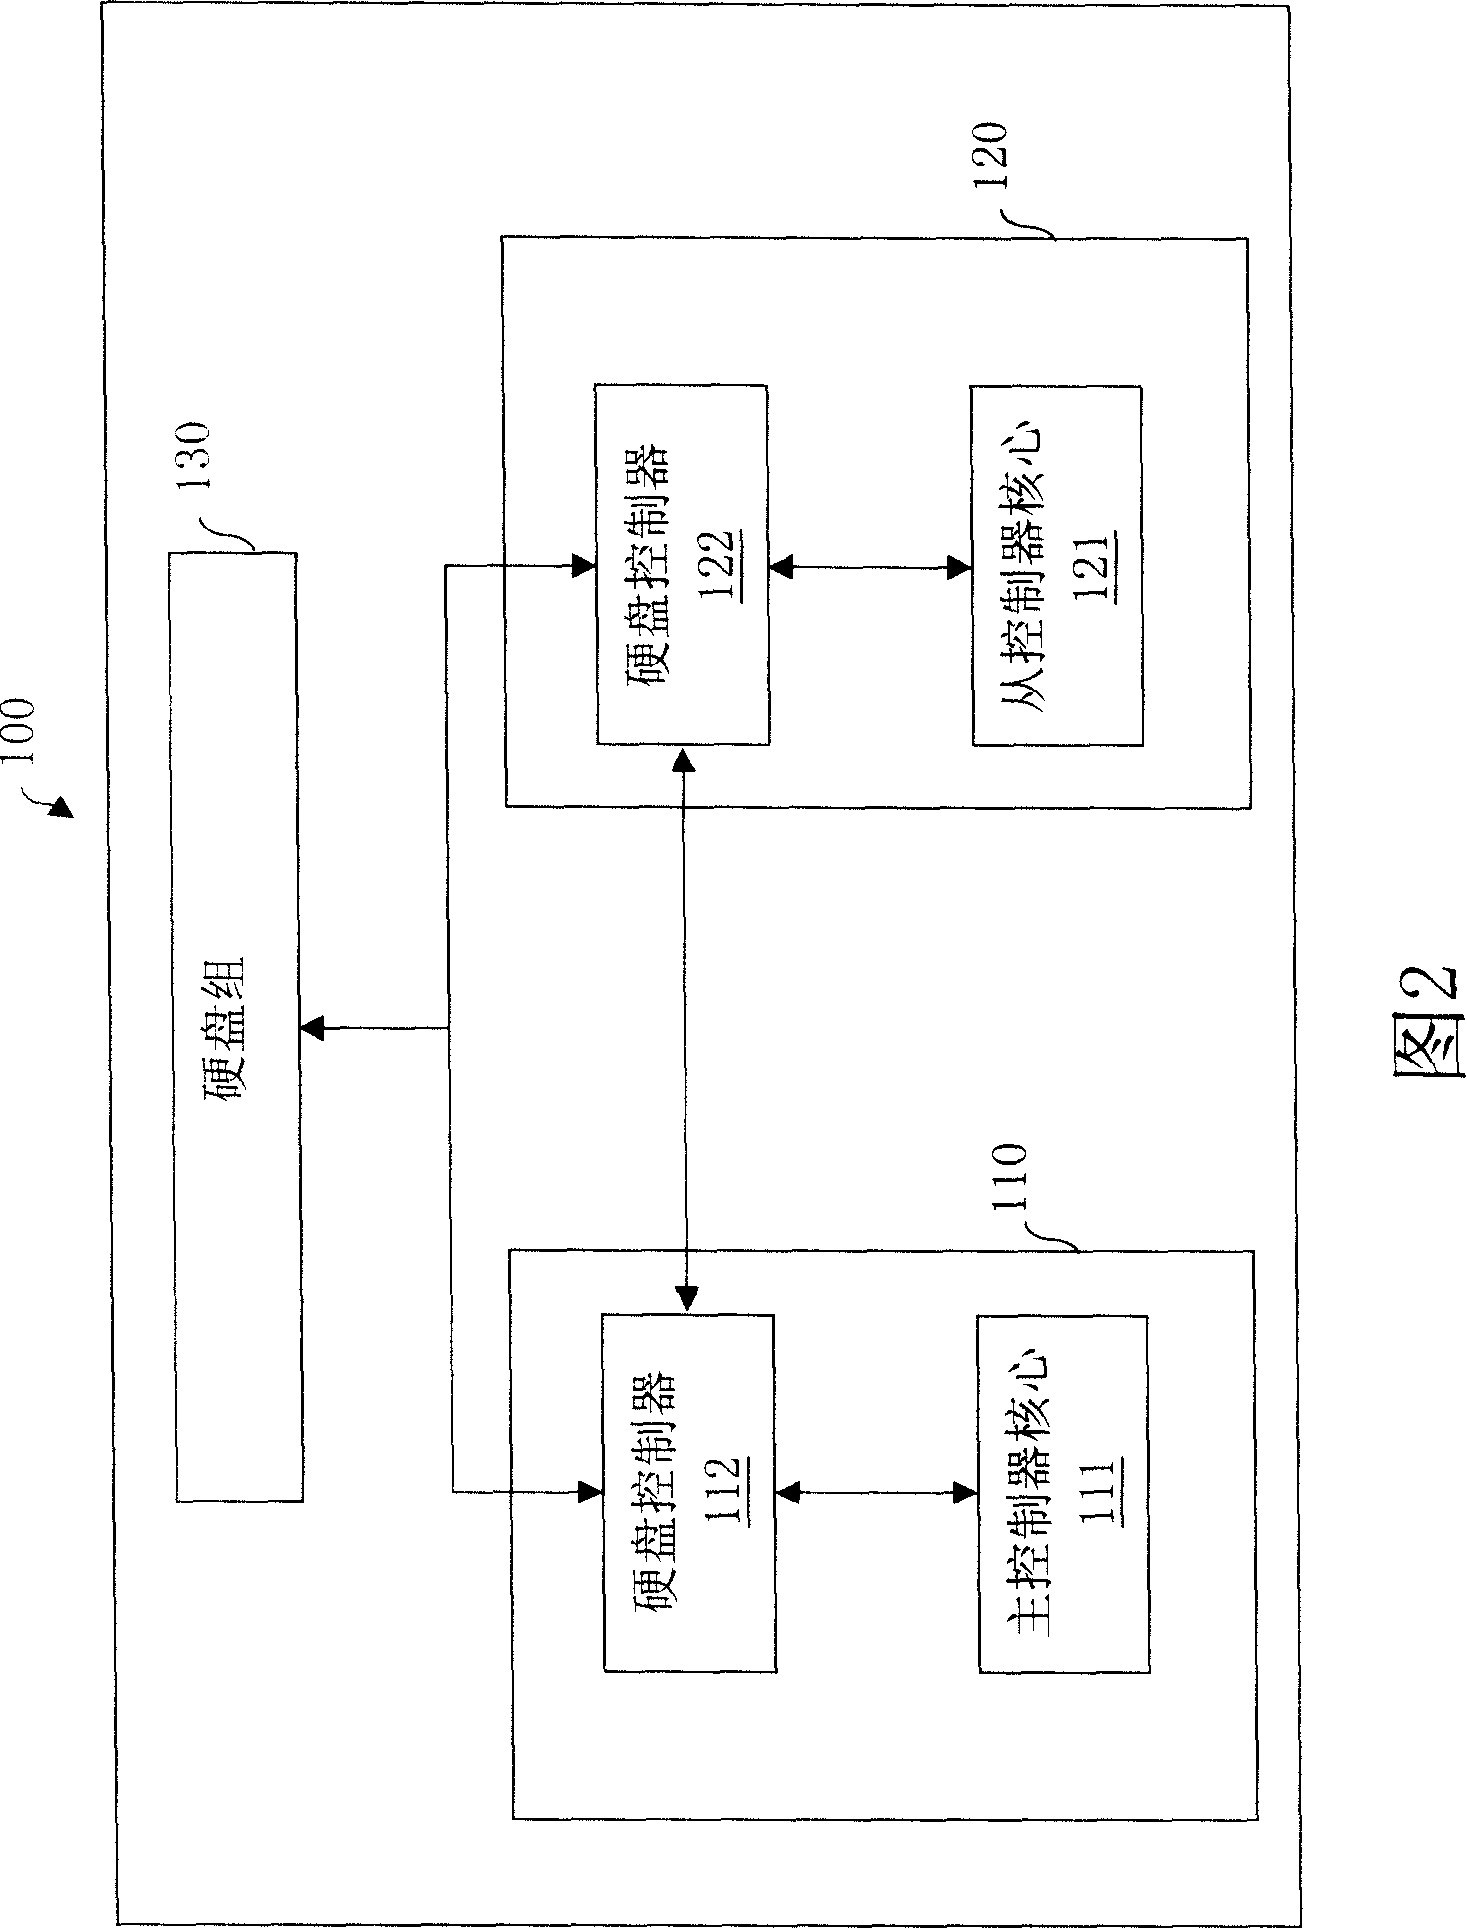 Double-controller communication system and method based on hard disk controller